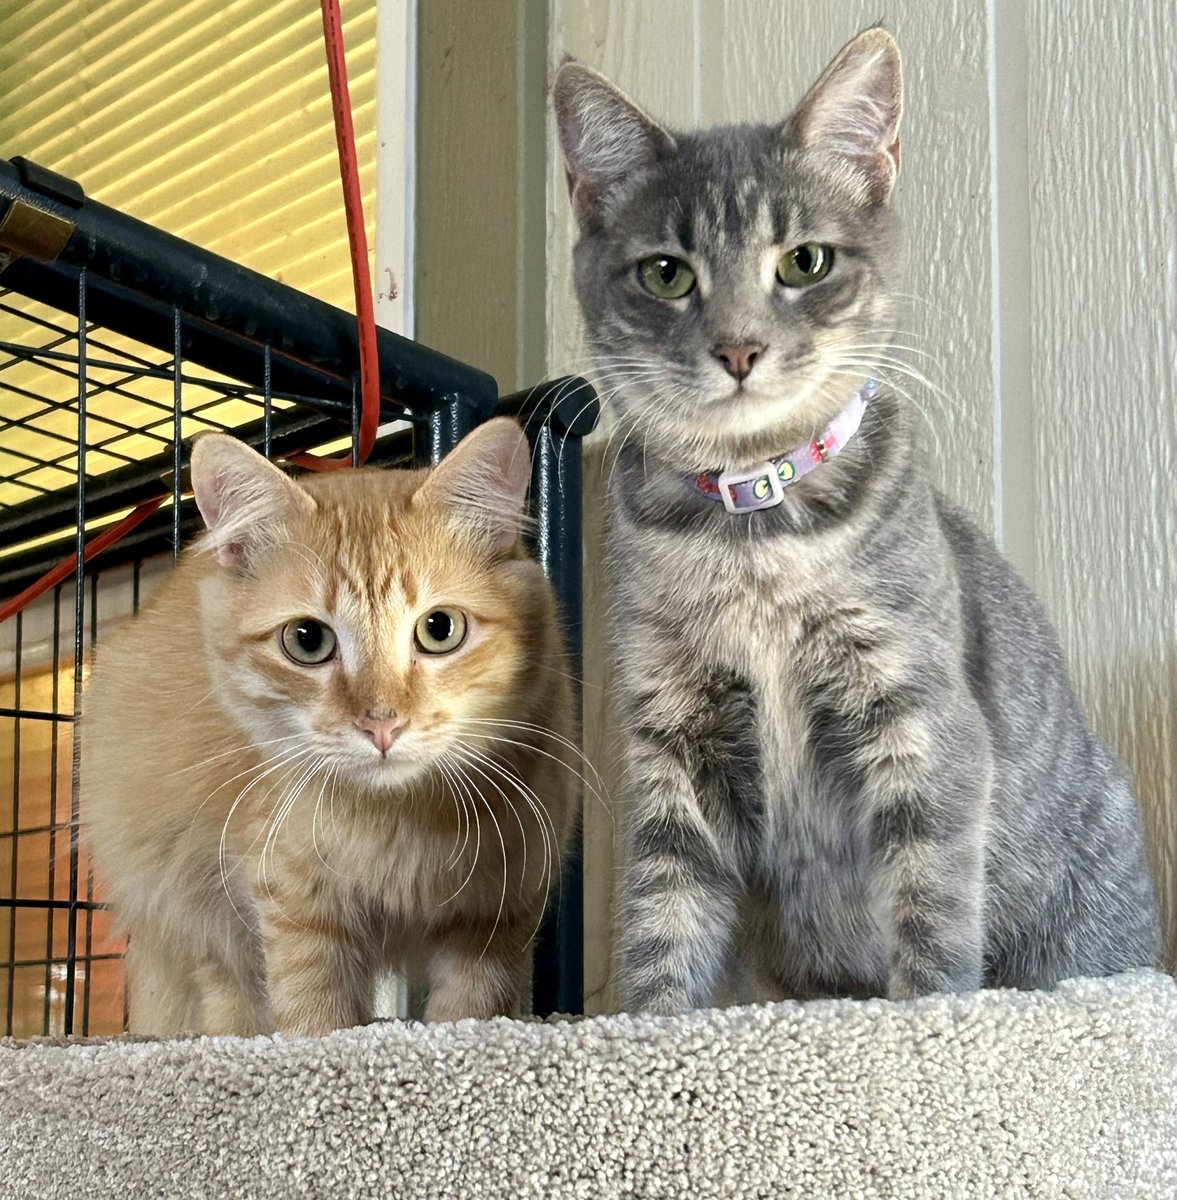 Gator (orange) is adopted but Cleo (gray) is still available! There is also an orange littermate who is soooo cute named Mochi.